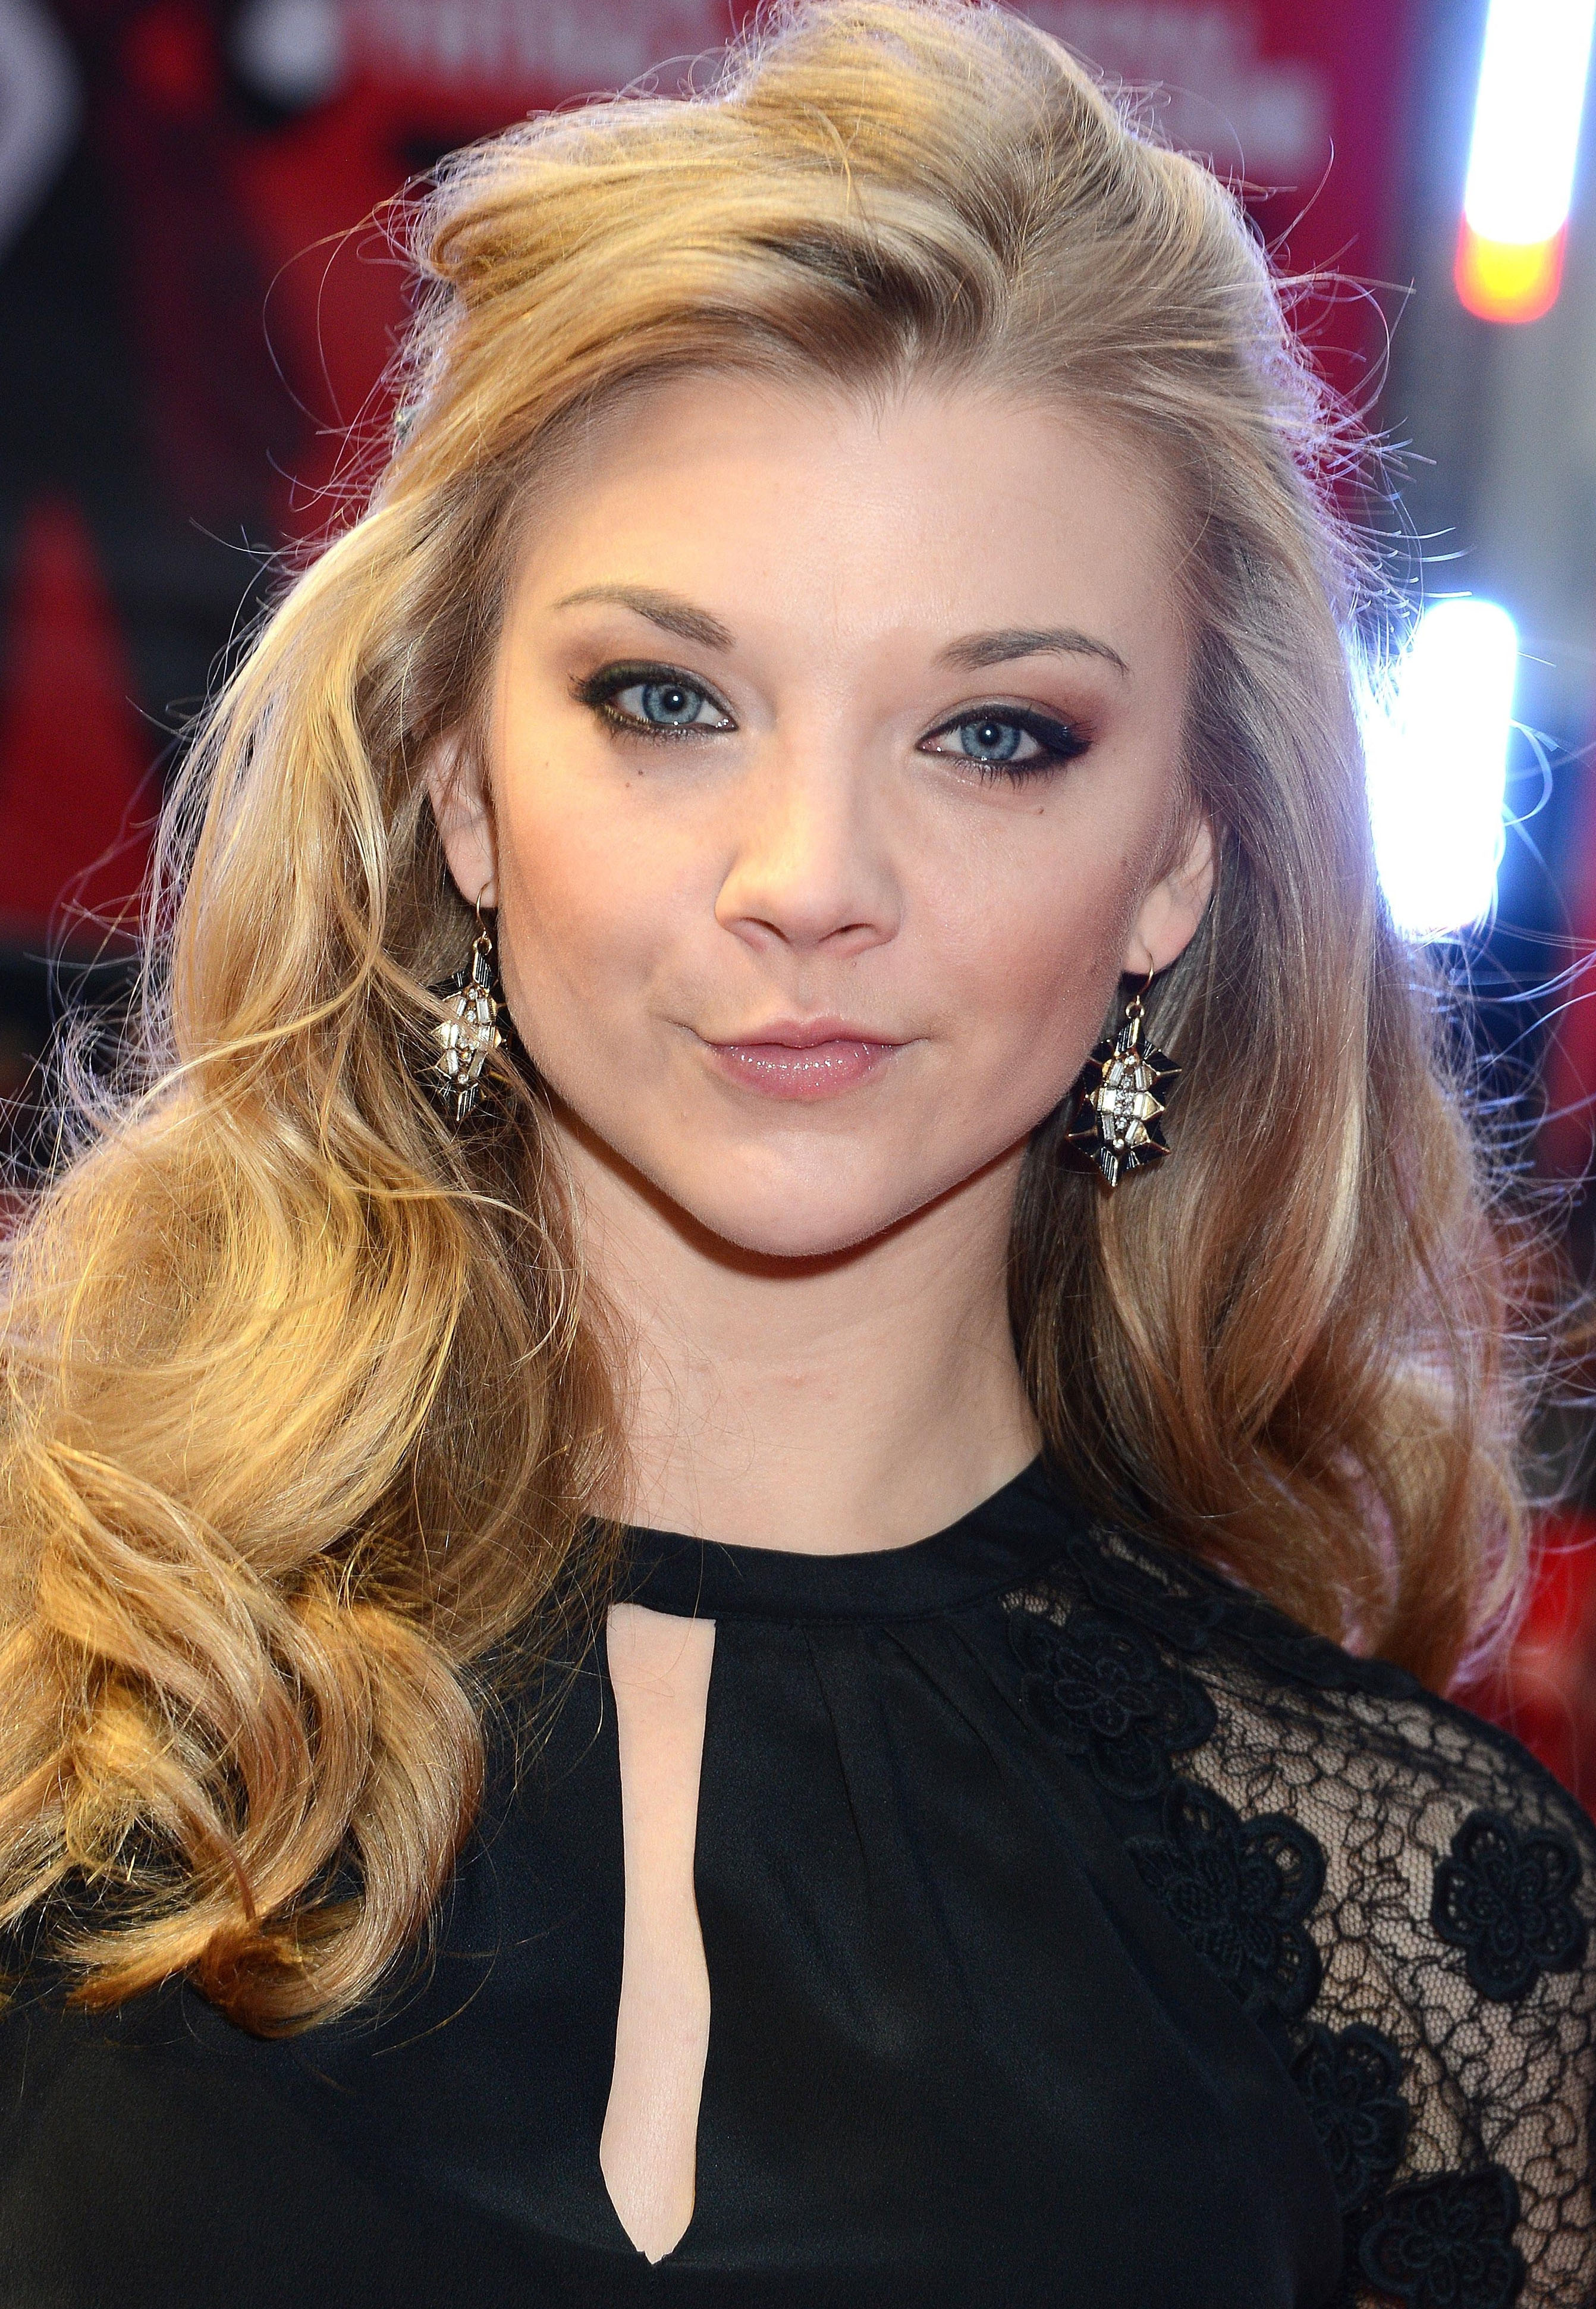 Over 868 natalie dormer posts sorted by time, relevancy, and popularity. 